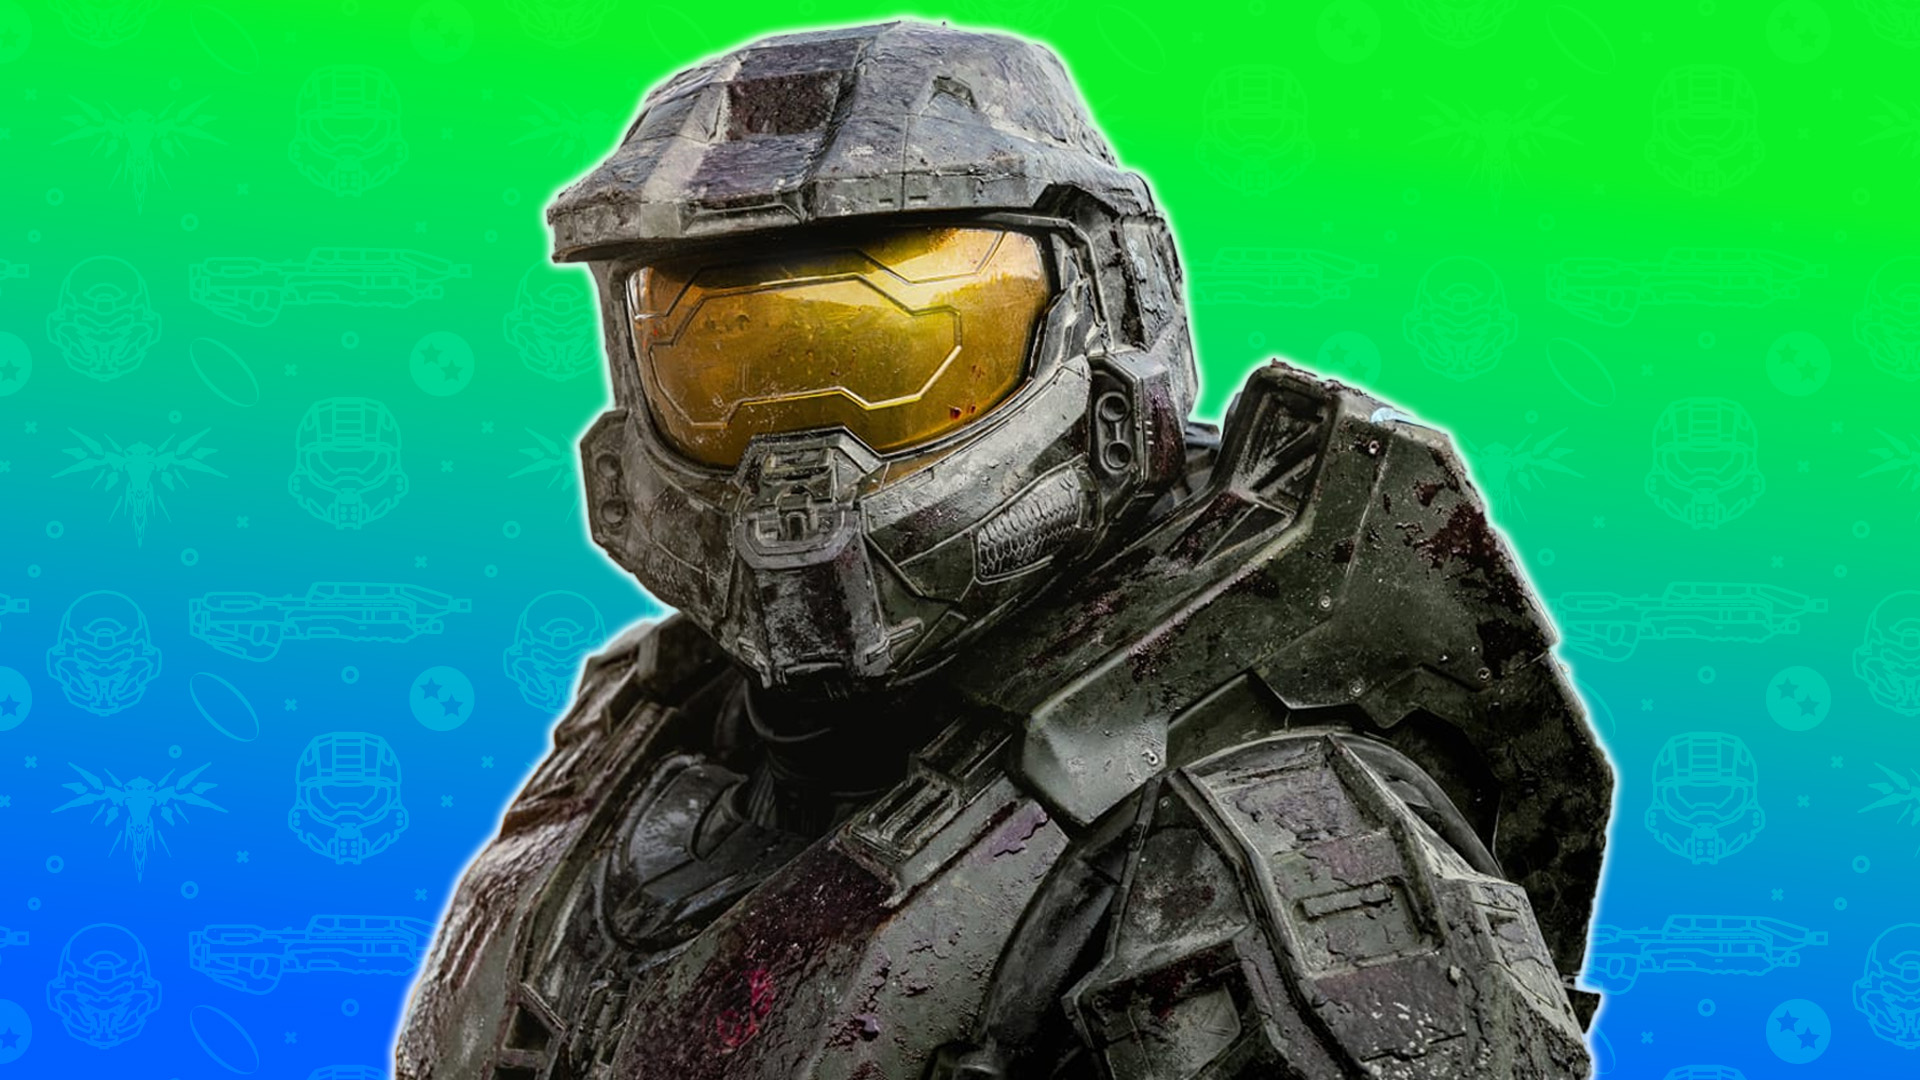 Paramount+ Rolls Out Official Trailer and Premiere Date For “HALO